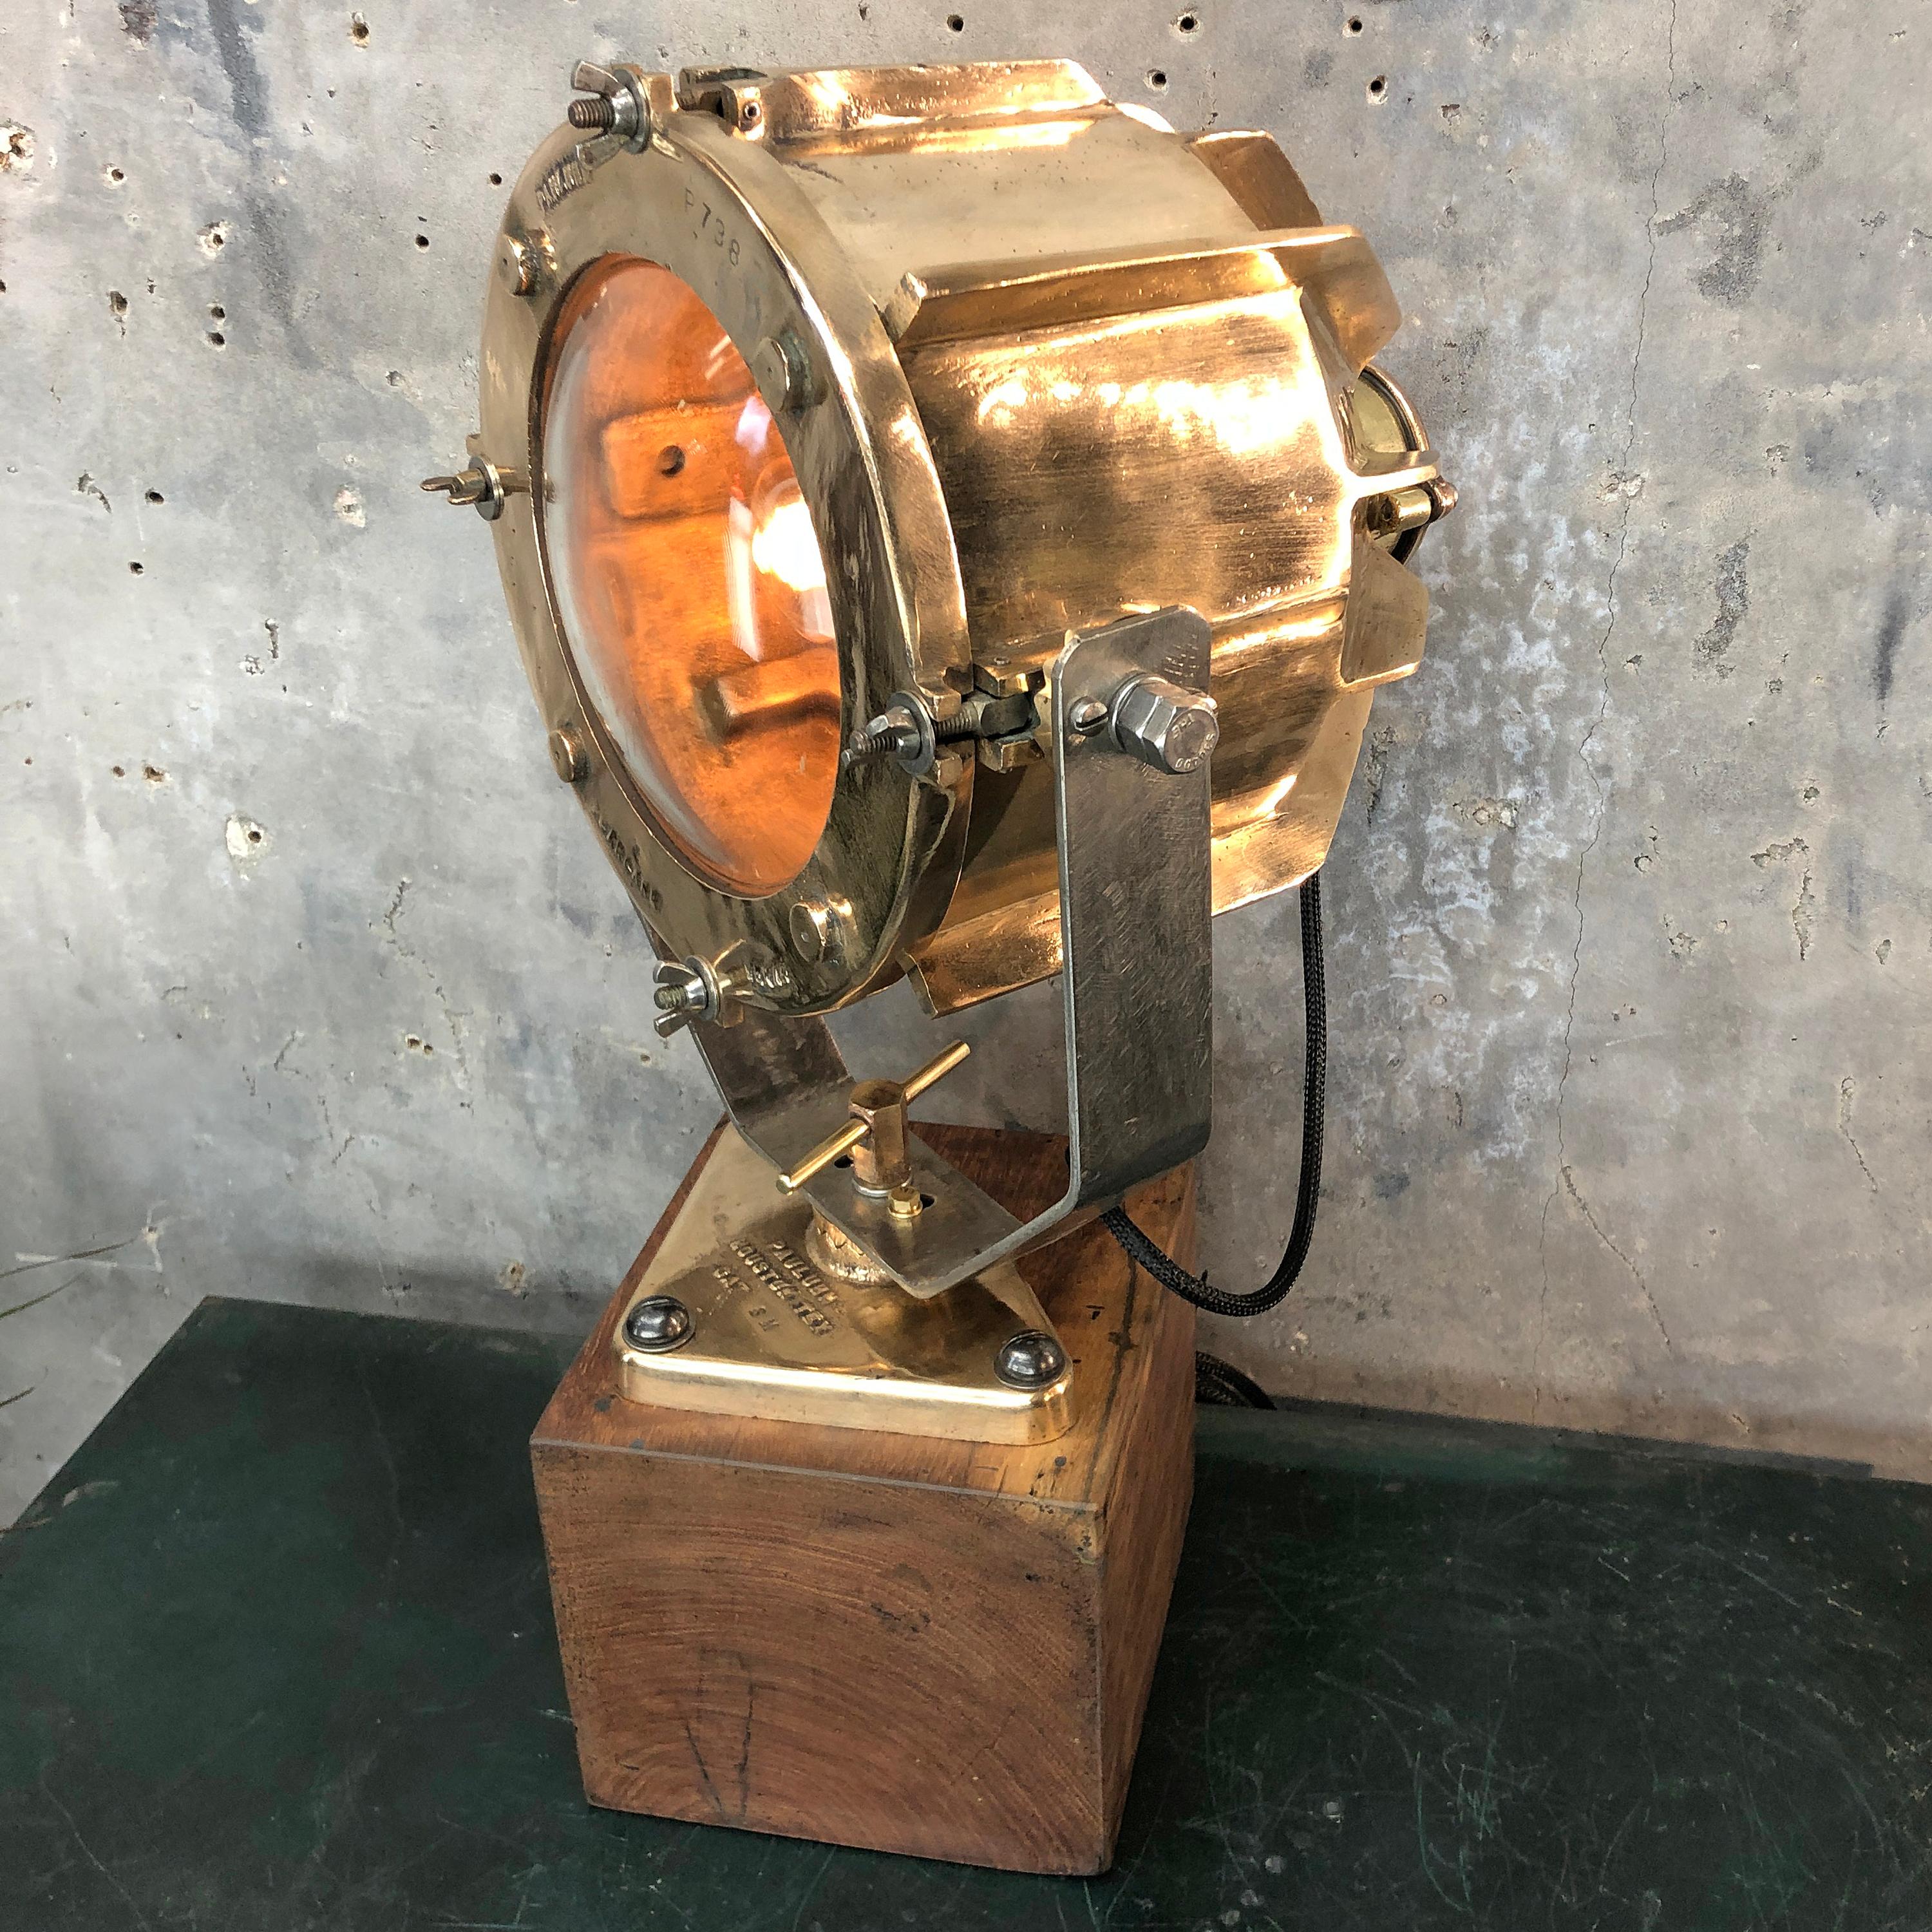 A vintage Industrial table lamp comprised of a solid bronze cargo light and teak timber base.

The lamp was manufactured by Crouse Hinds / Pauluhn, Texas, USA and the base has been made using teak reclaimed from a cargo ship.

The cargo light